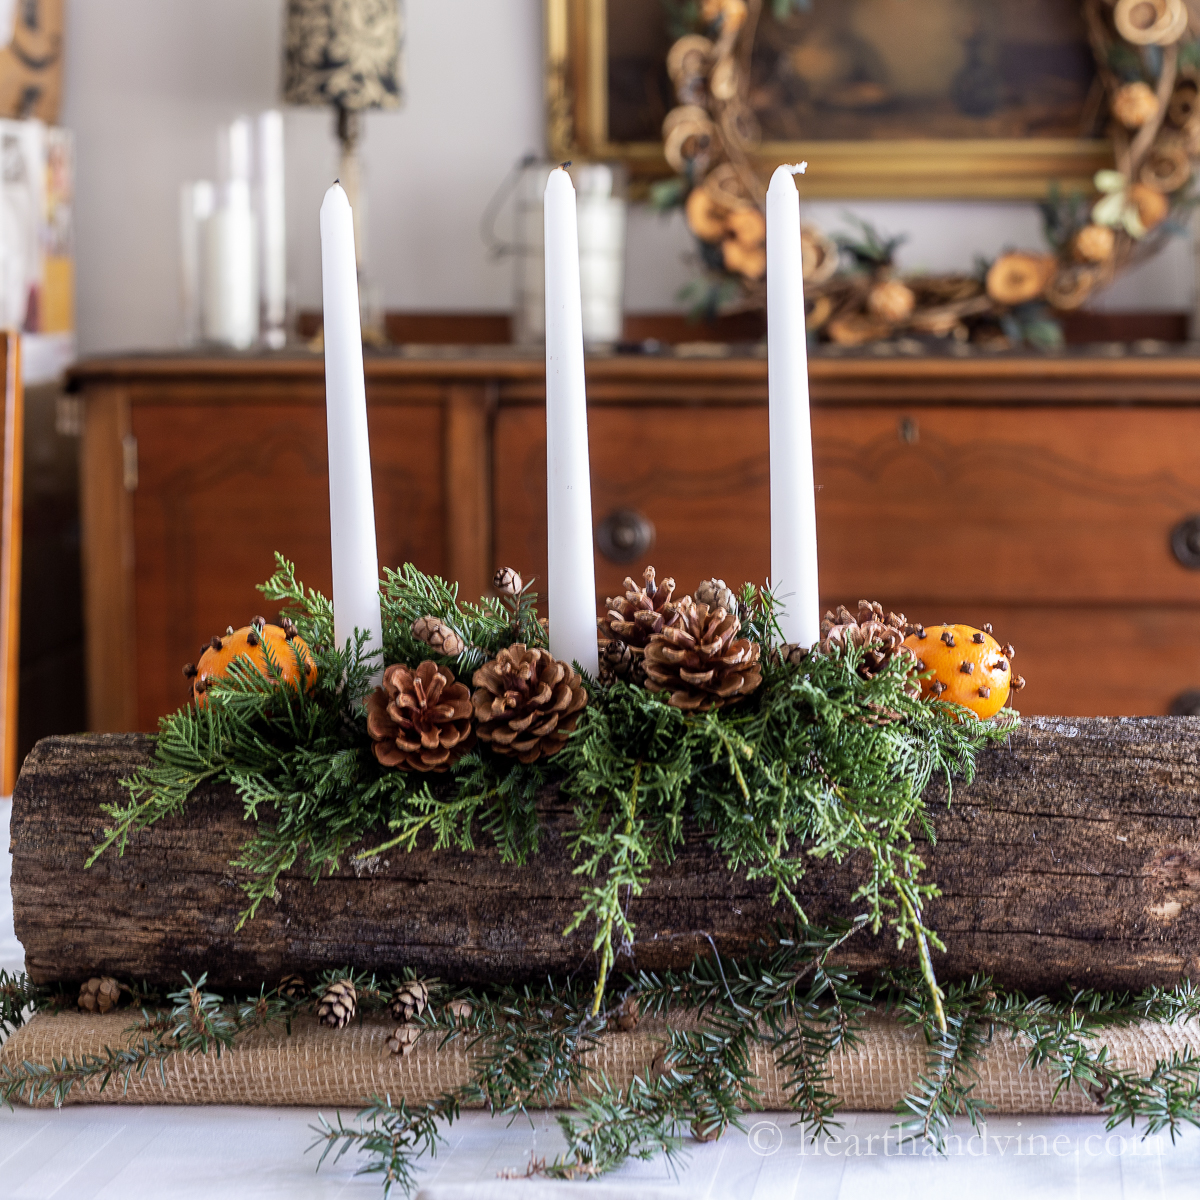 Yule log decorated with evergreens, three white candles, pine cones and pomanders.